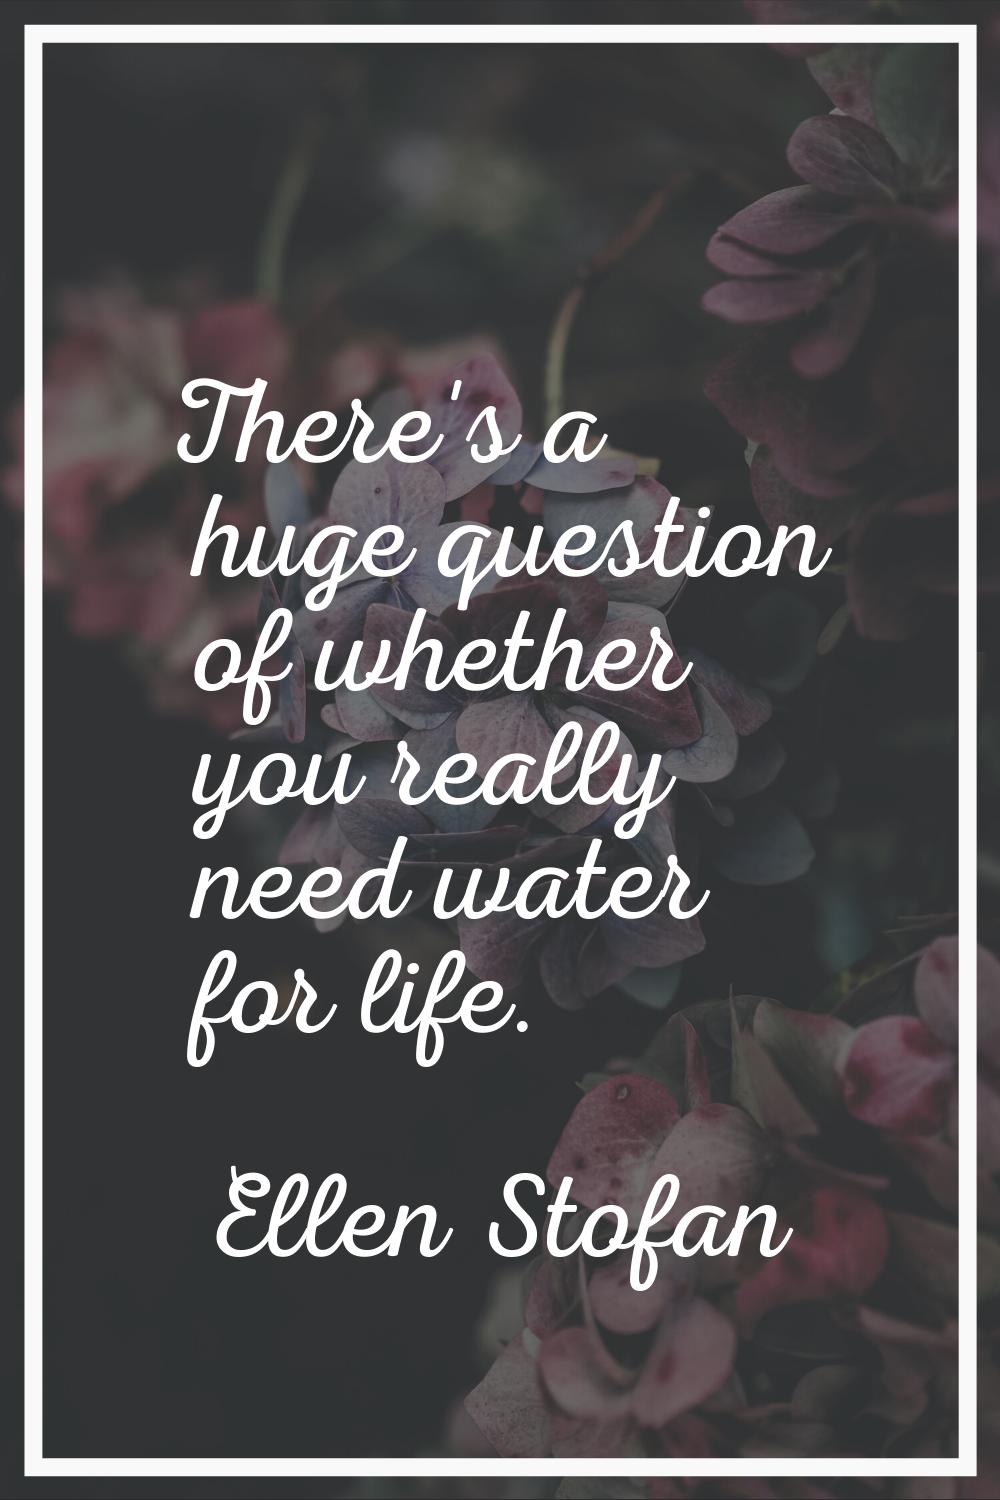 There's a huge question of whether you really need water for life.